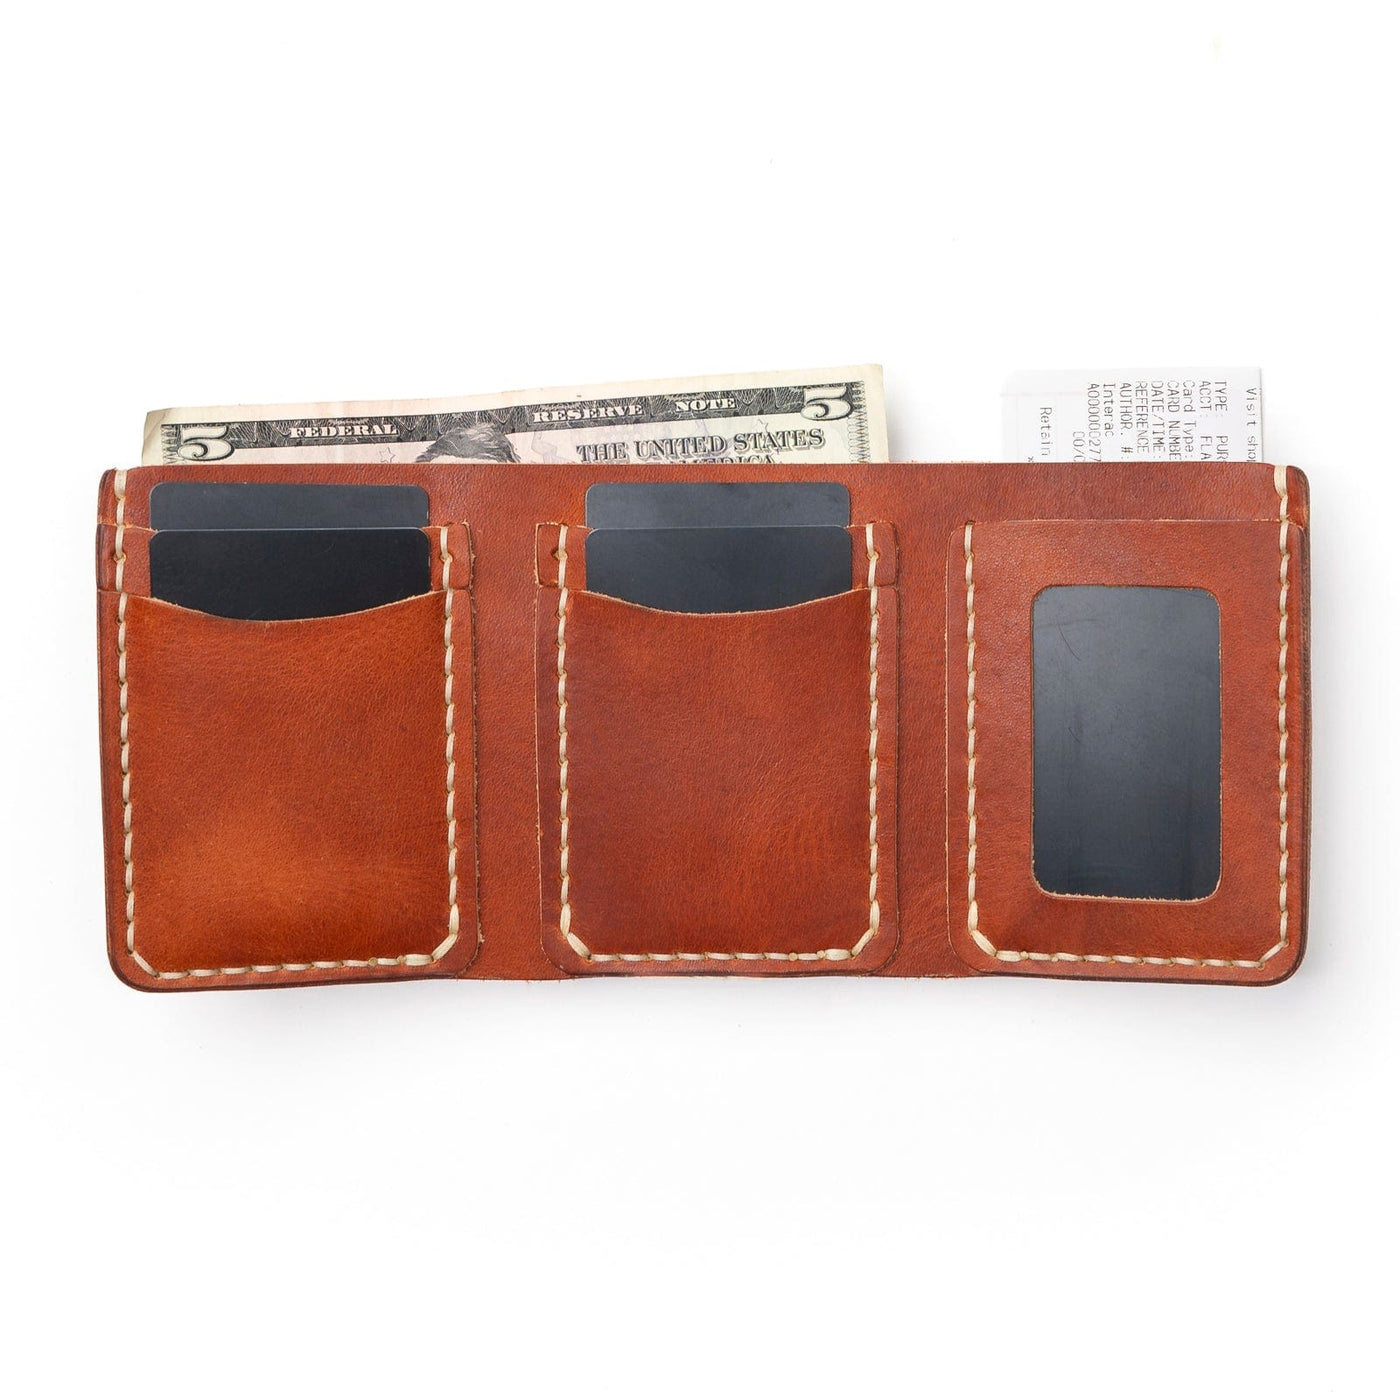 English Tan Leather Trifold Wallet: A Statement of Elegance